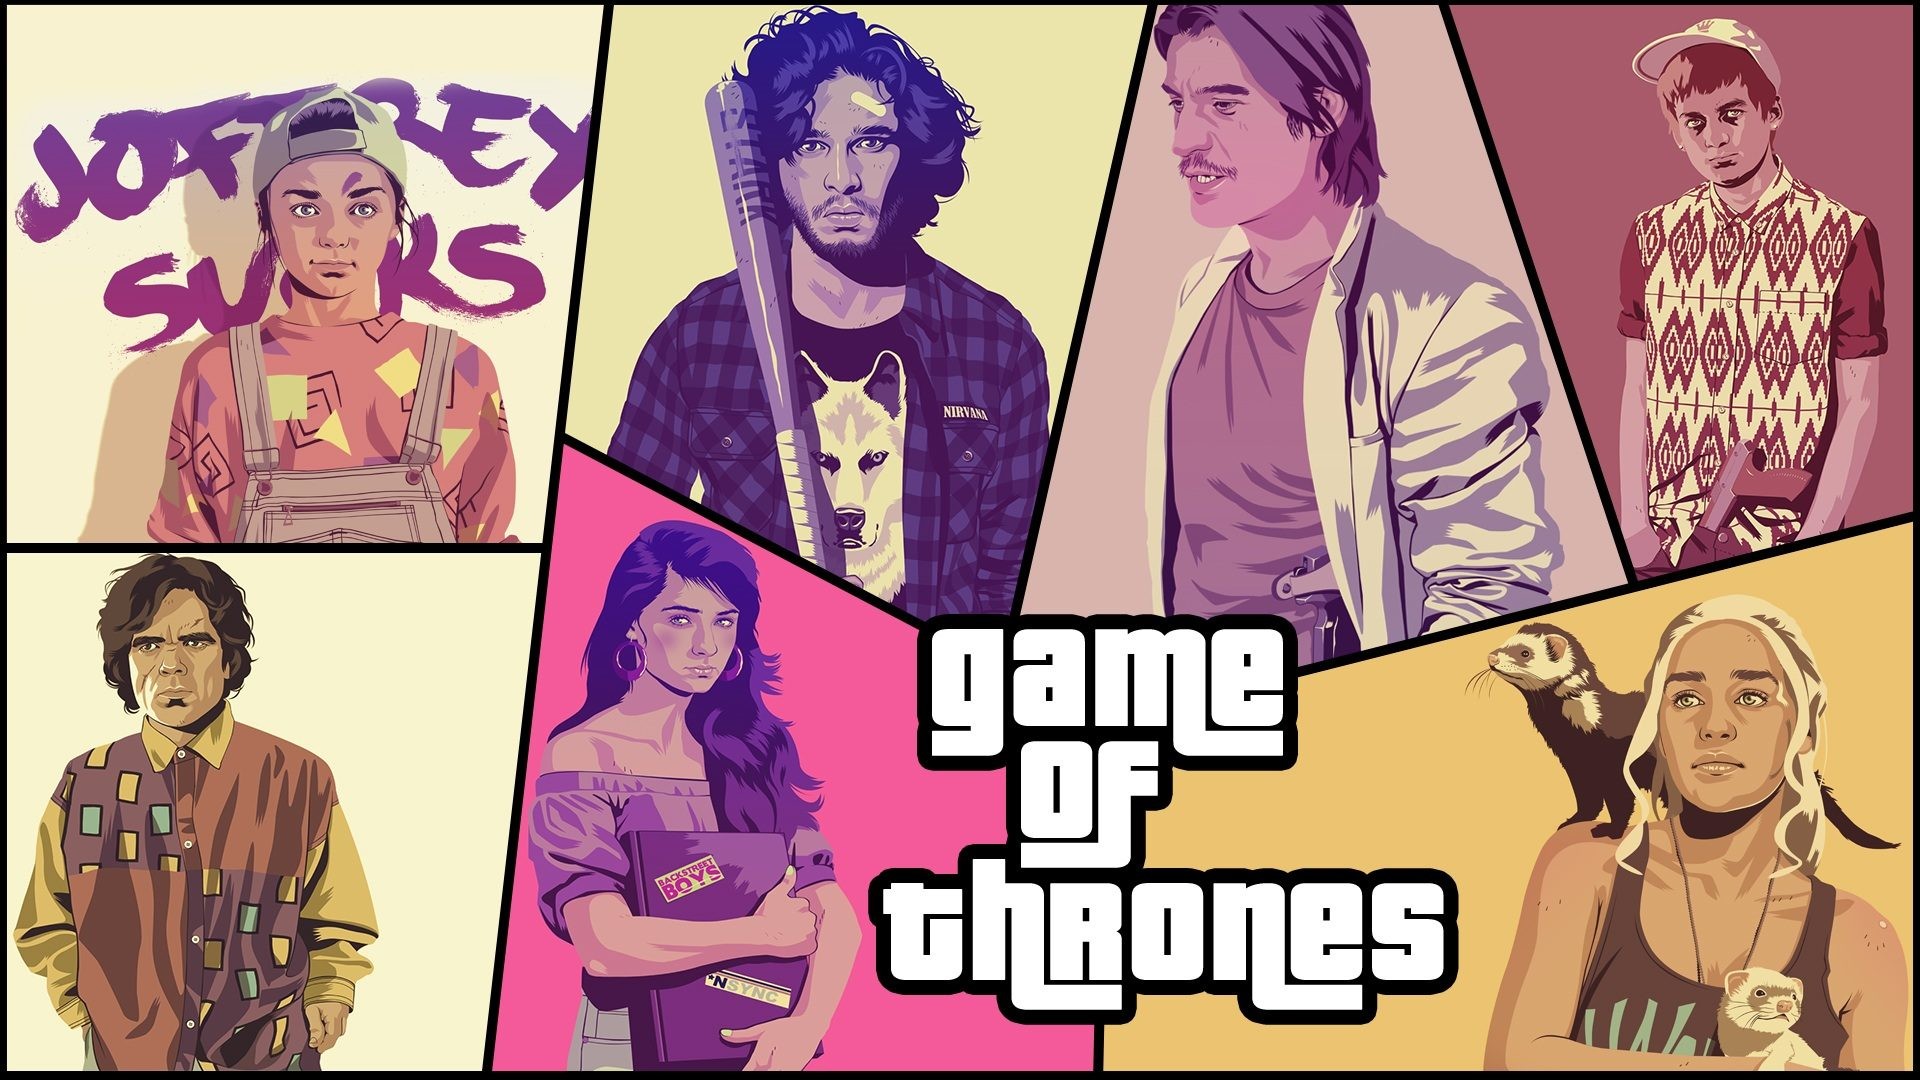 1920x1080 Cool Artwork Wallpaper Of Game Of Thrones In GTA Game Concept | PaperPull